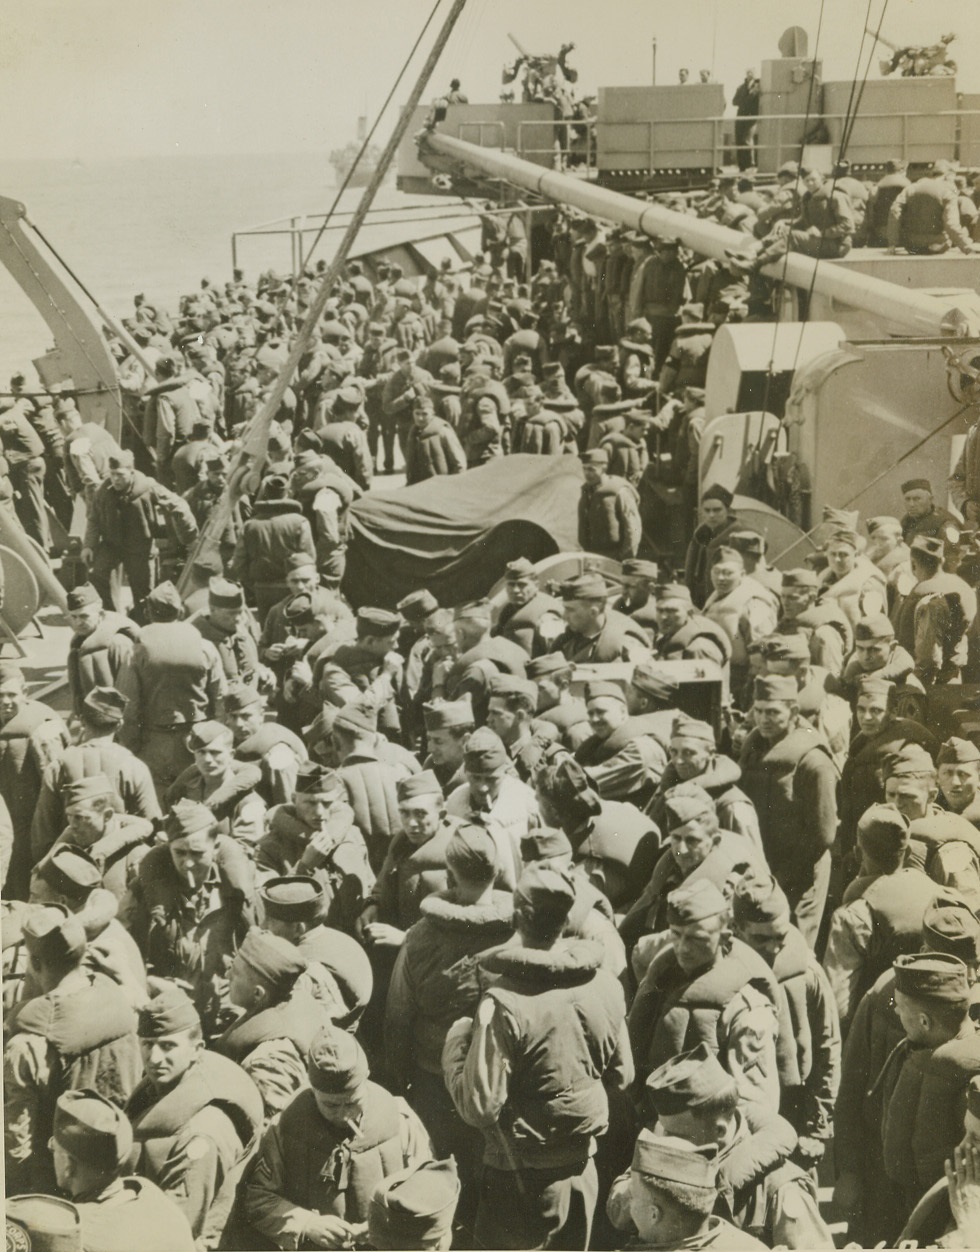 They’re Going Over,  7/17/1944. En Route to France—Bundled up in puffy life jackets and crowding together on the deck of an Allied vessel taking them to the coast of France, American infantrymen smoke and chat about the adventure before them. They’ll reinforce Yank troops now chasing Jerry back across the fields of France.  Credit: Signal Corps Photo from ACME.;